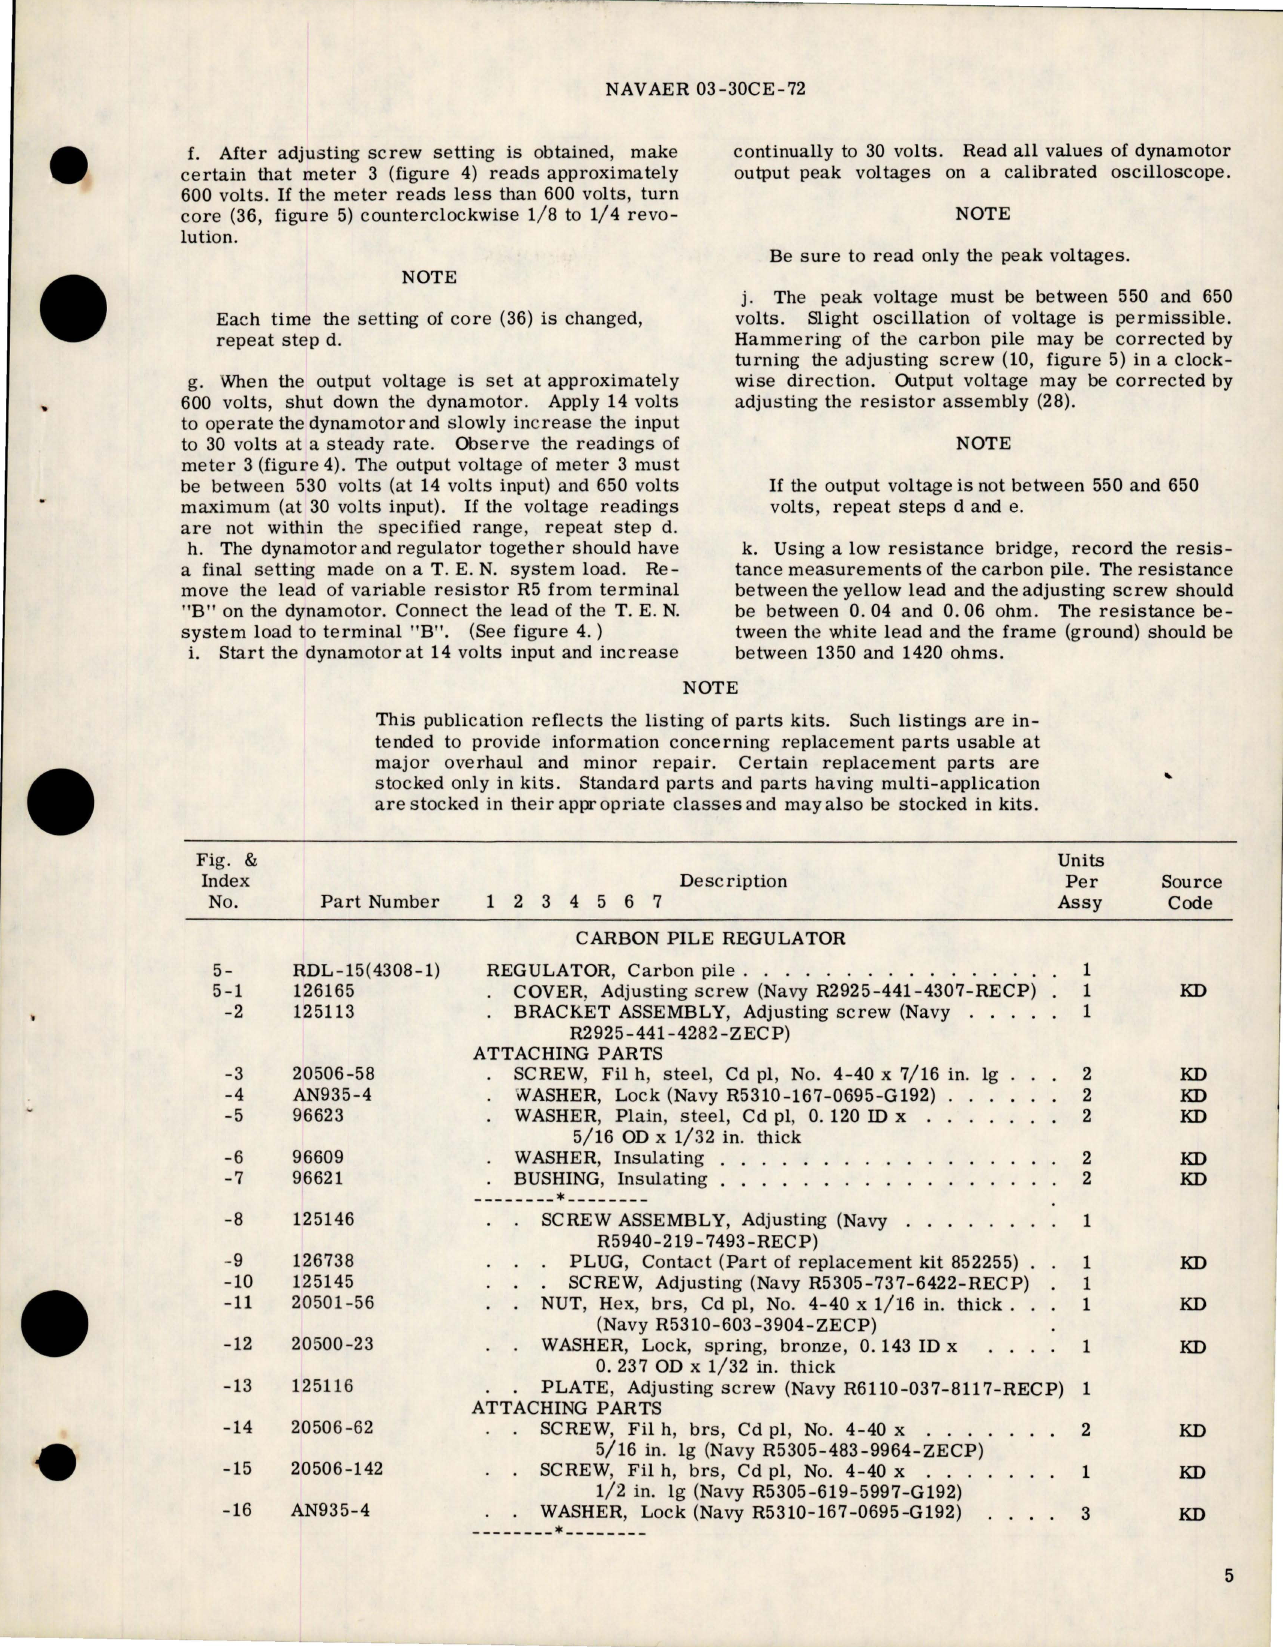 Sample page 5 from AirCorps Library document: Overhaul Instructions with Parts Breakdown for Carbon Pile Regulator - Type RDL-15 - RD4308-1